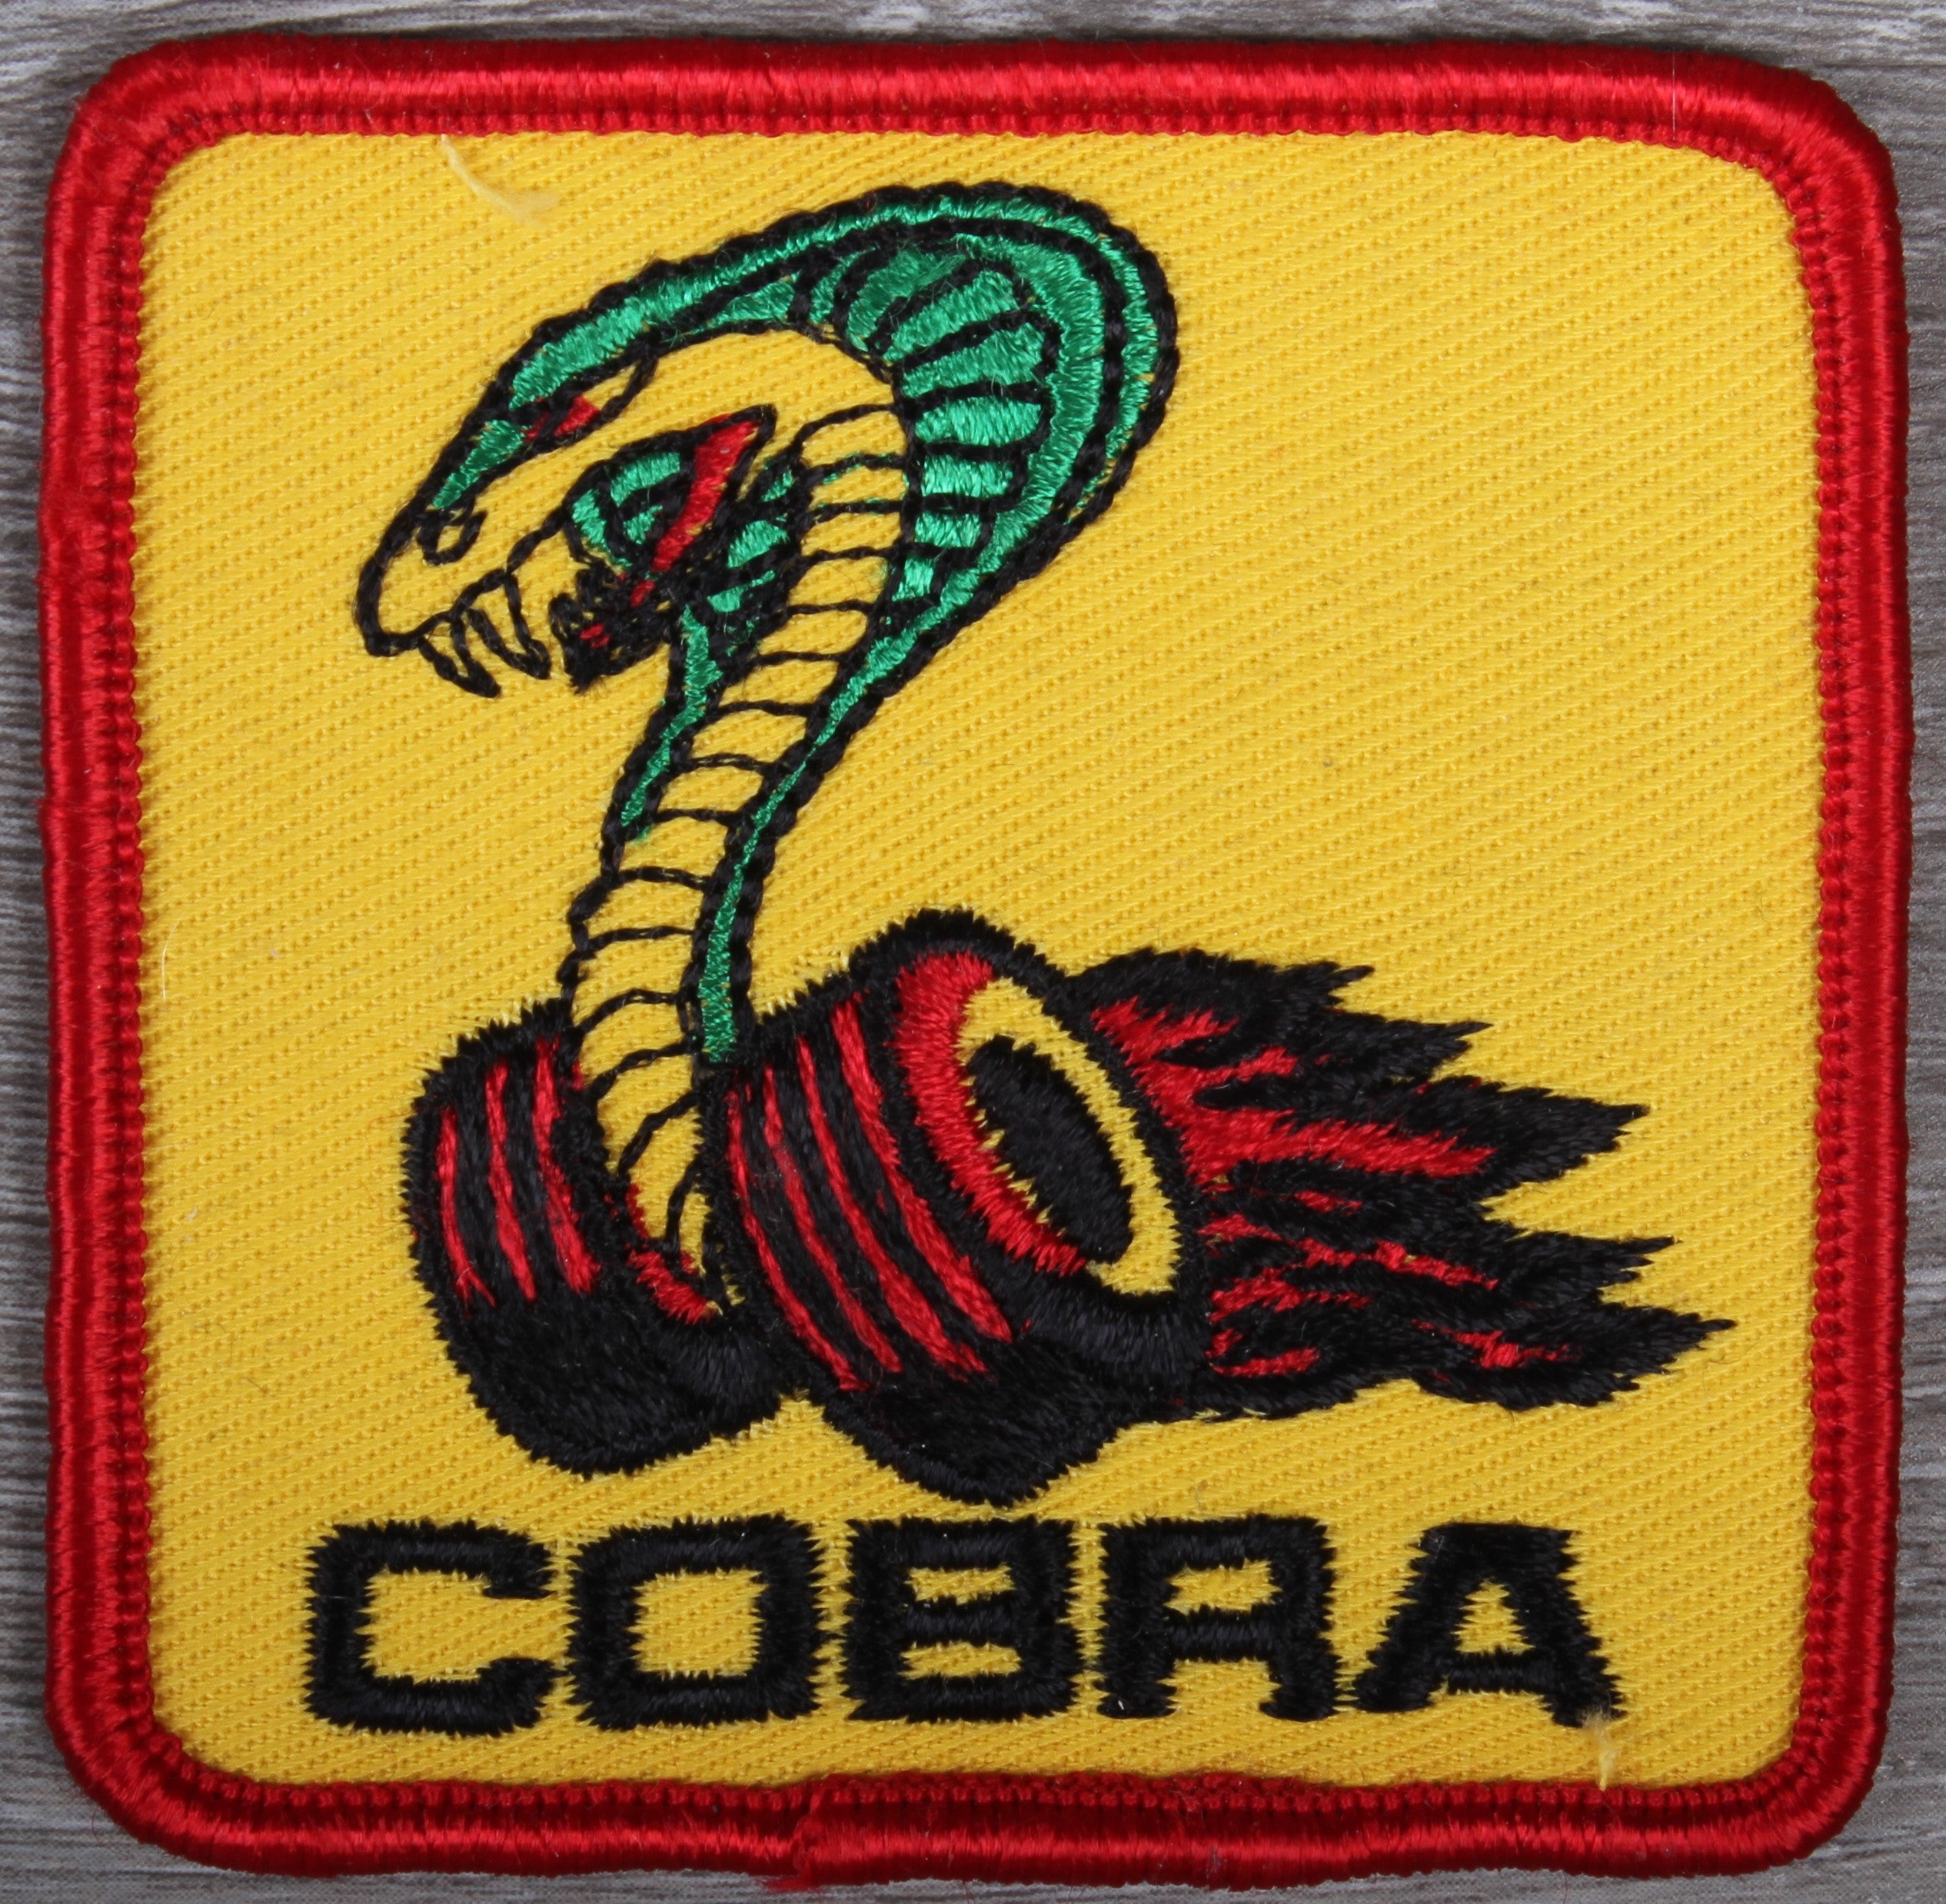 Shelby 60th Anniversary Woven patch